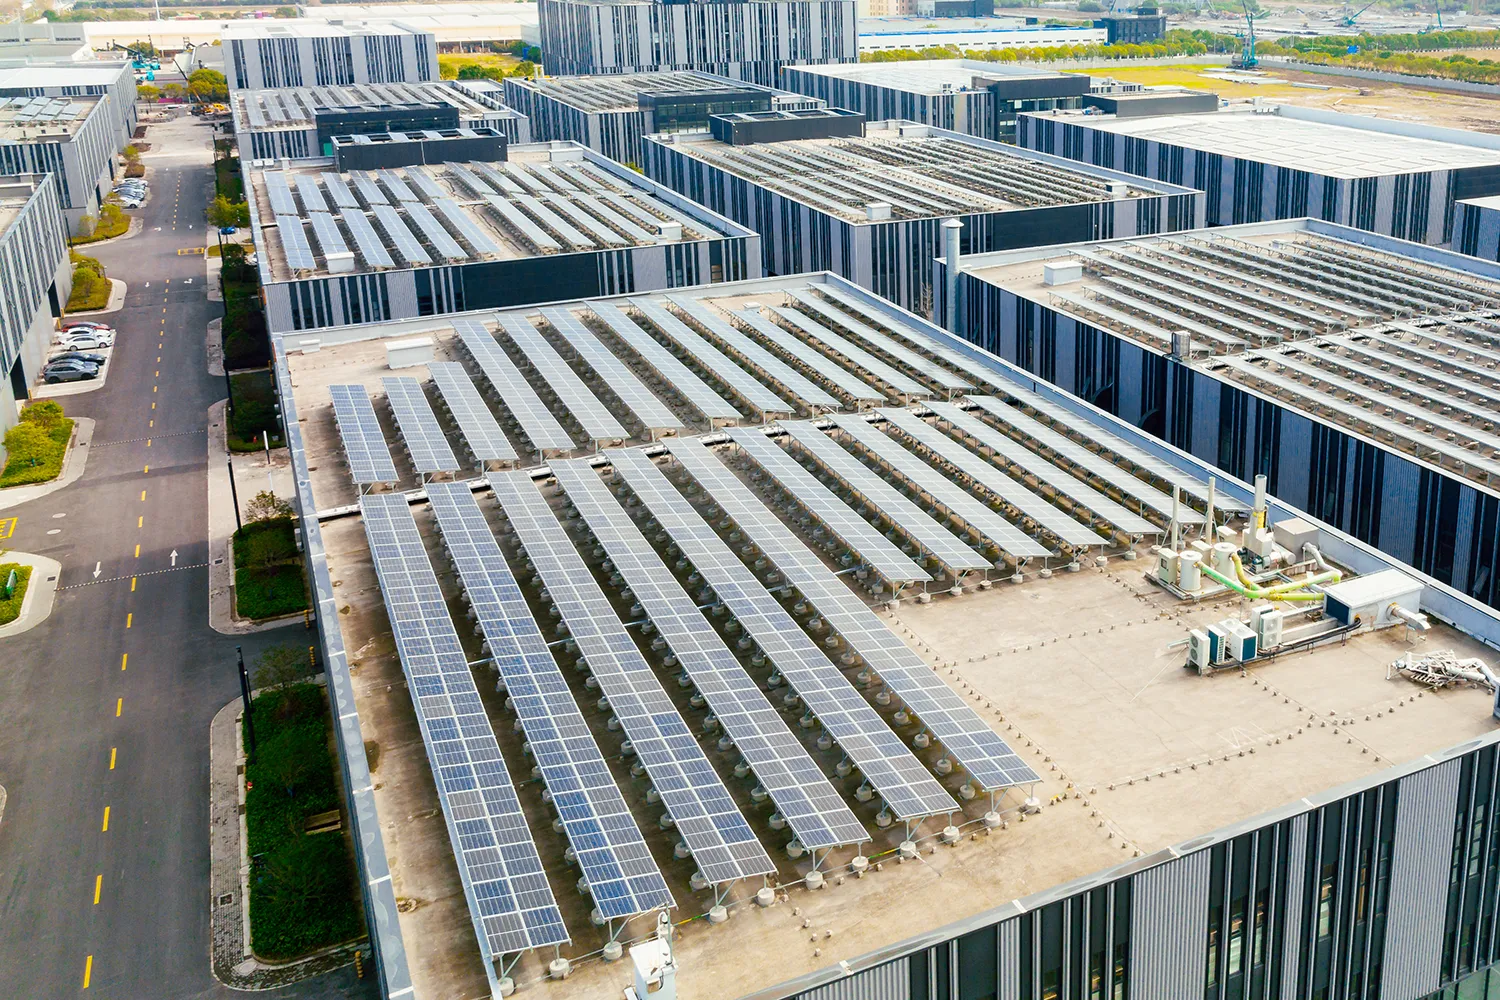 Aerial view of solar panels on factory roof. Blue shiny solar photo voltaic panels system product